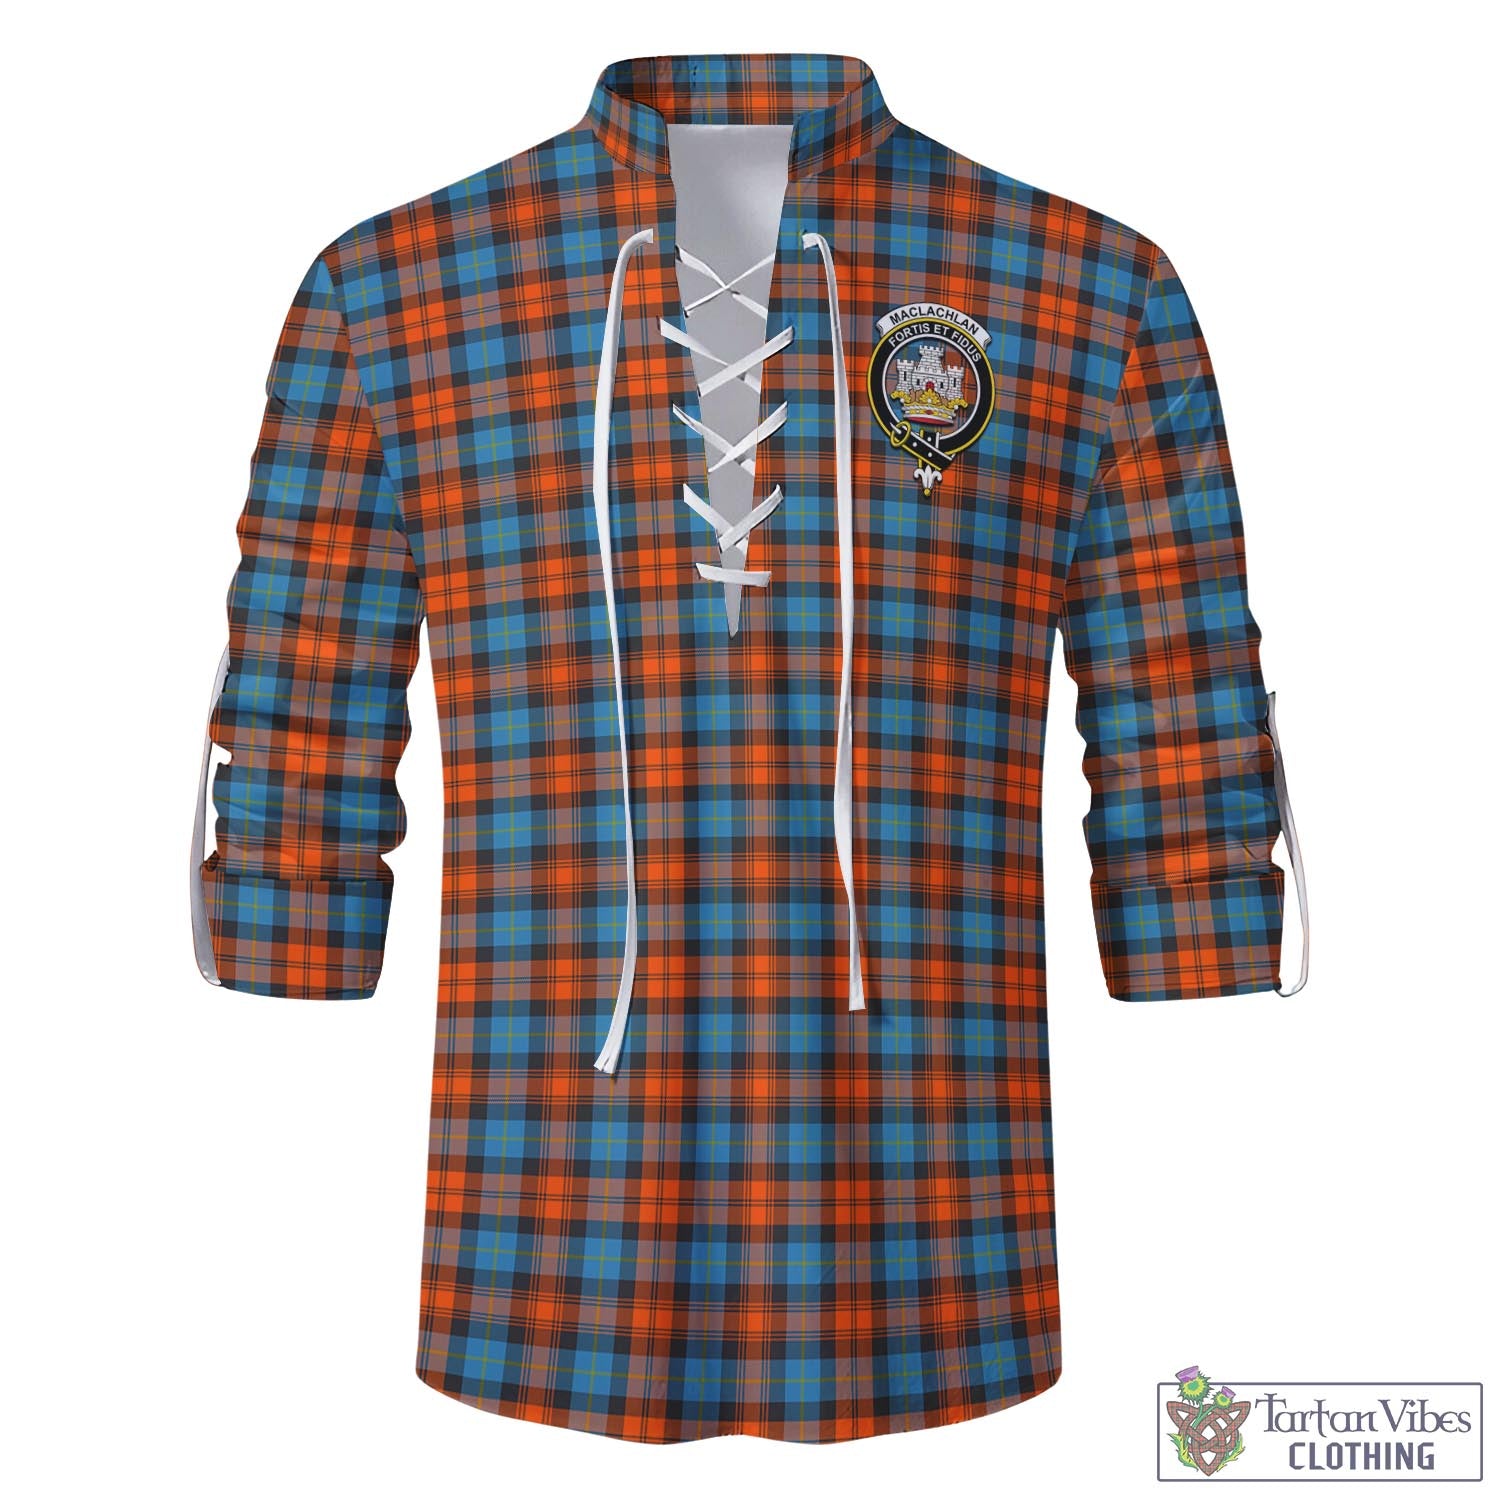 Tartan Vibes Clothing MacLachlan Ancient Tartan Men's Scottish Traditional Jacobite Ghillie Kilt Shirt with Family Crest